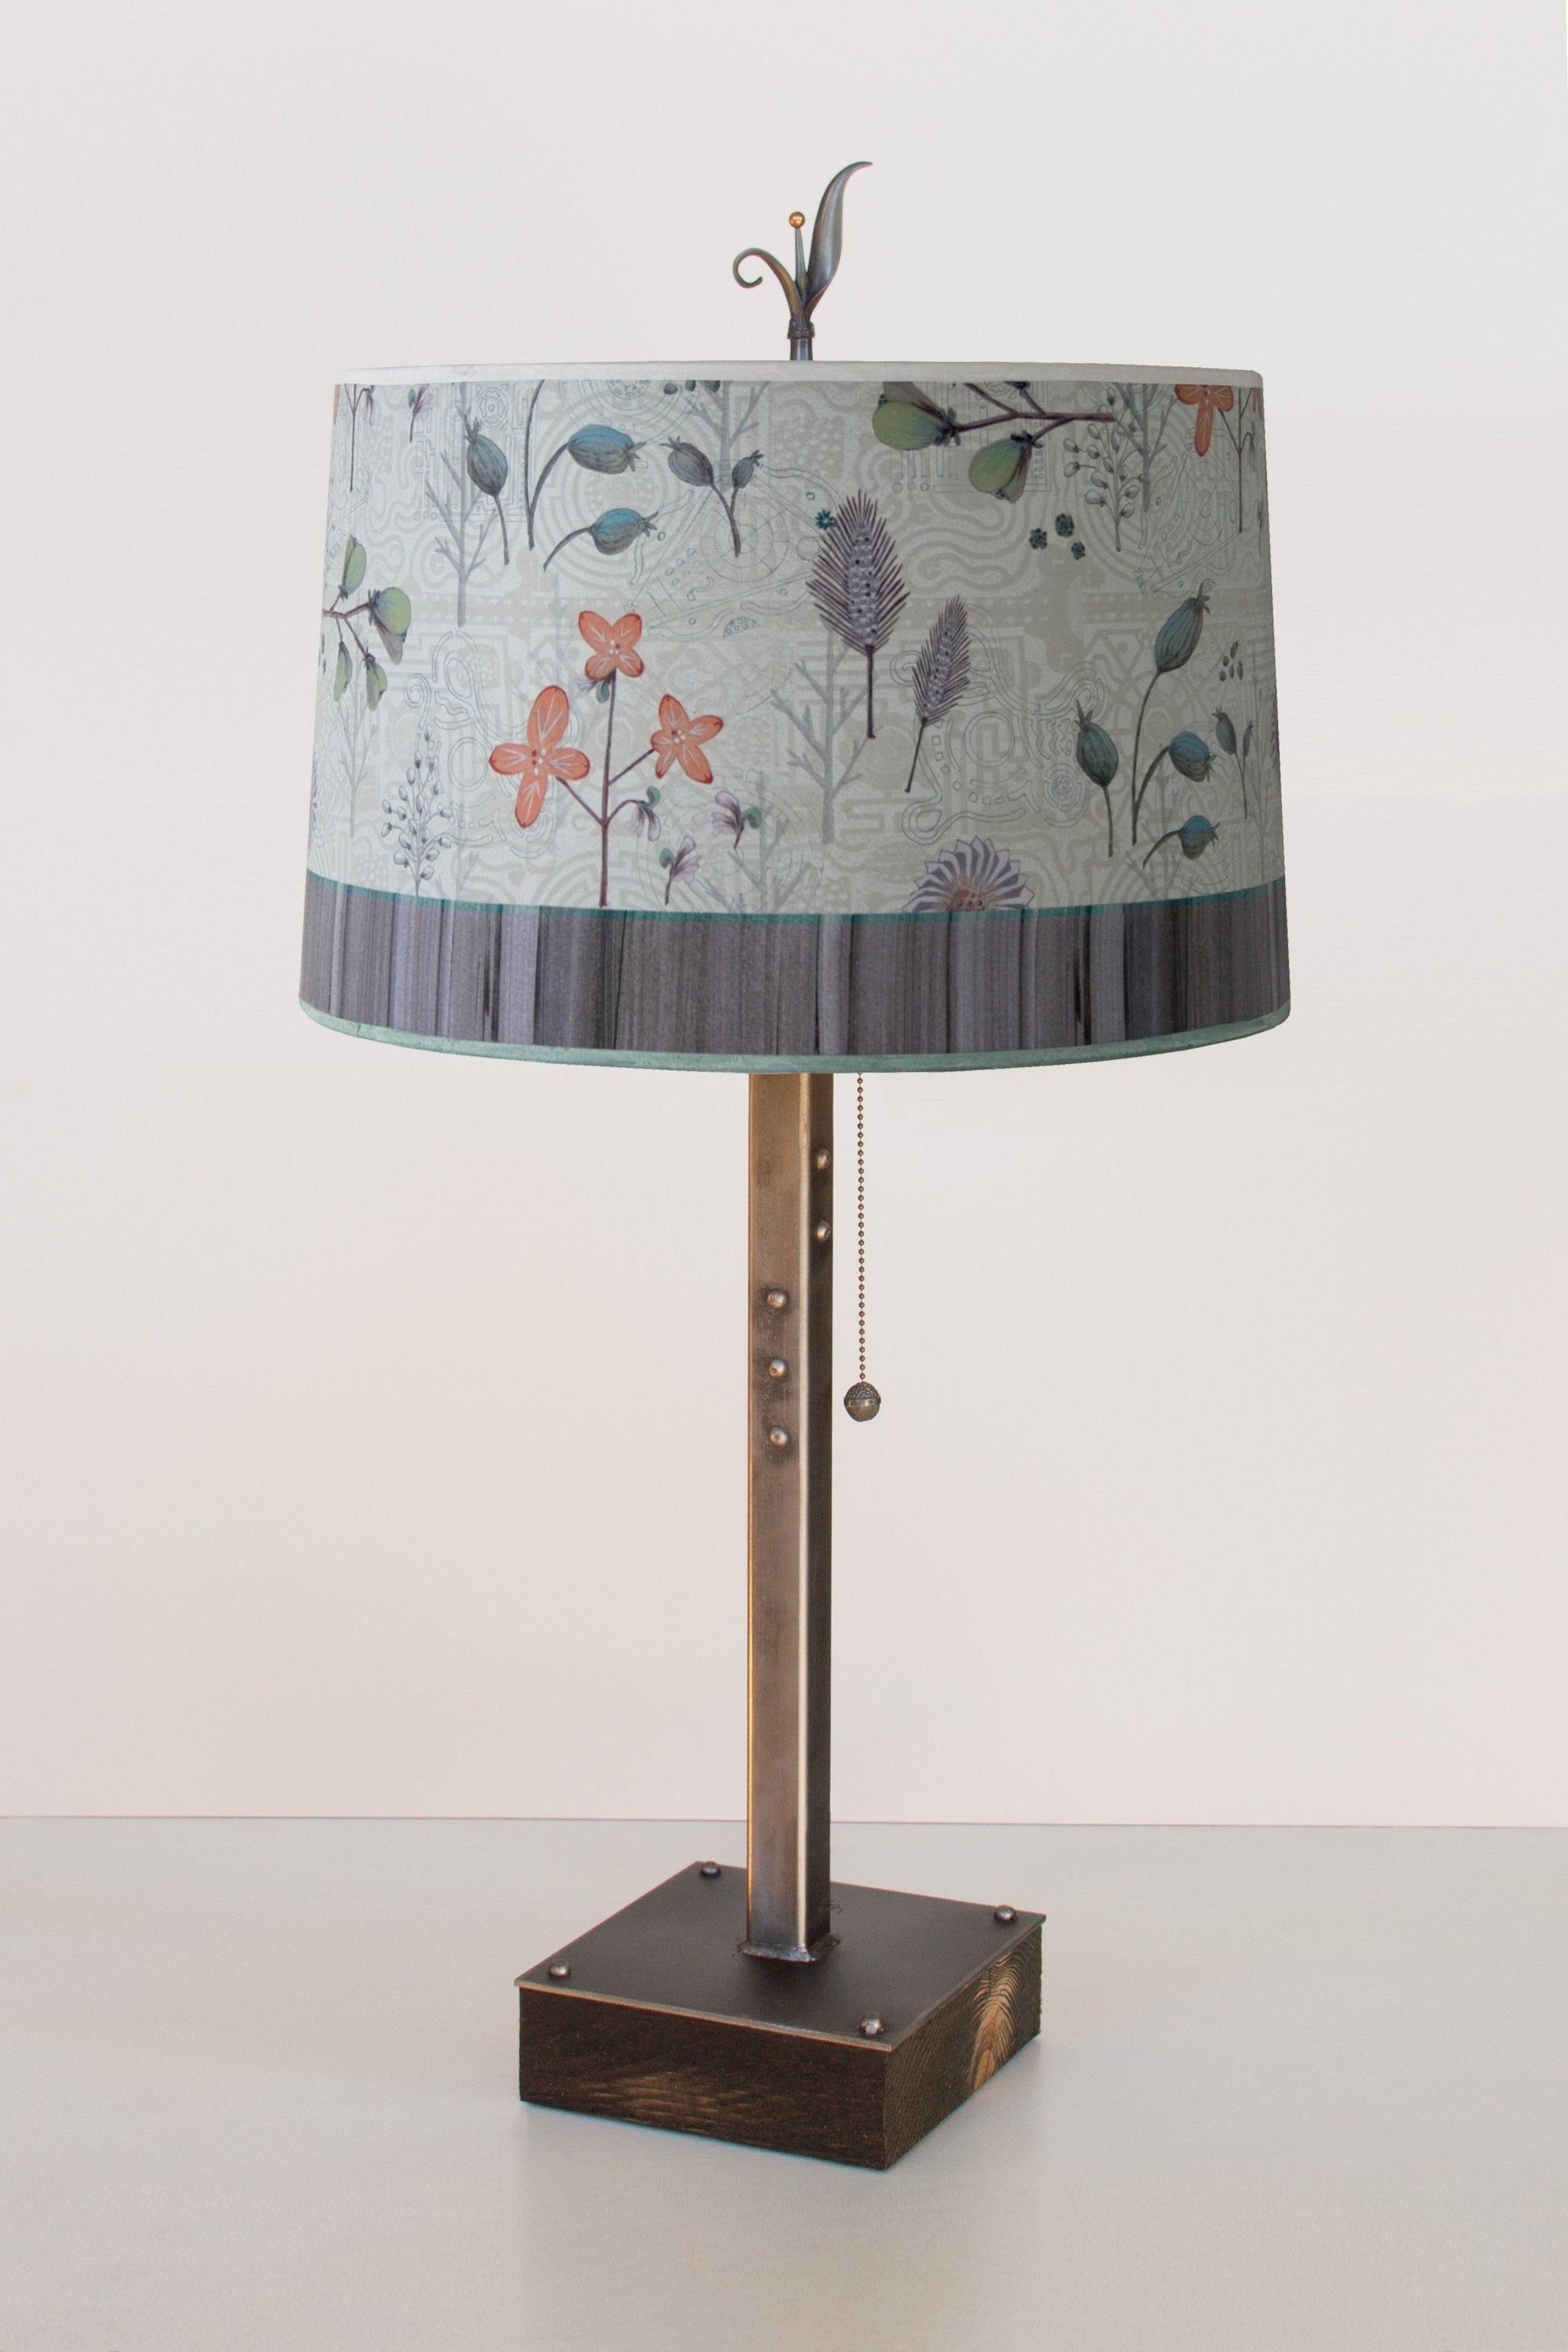 Janna Ugone & Co Table Lamps Steel Table Lamp on Wood with Large Drum Shade in Flora and Maze